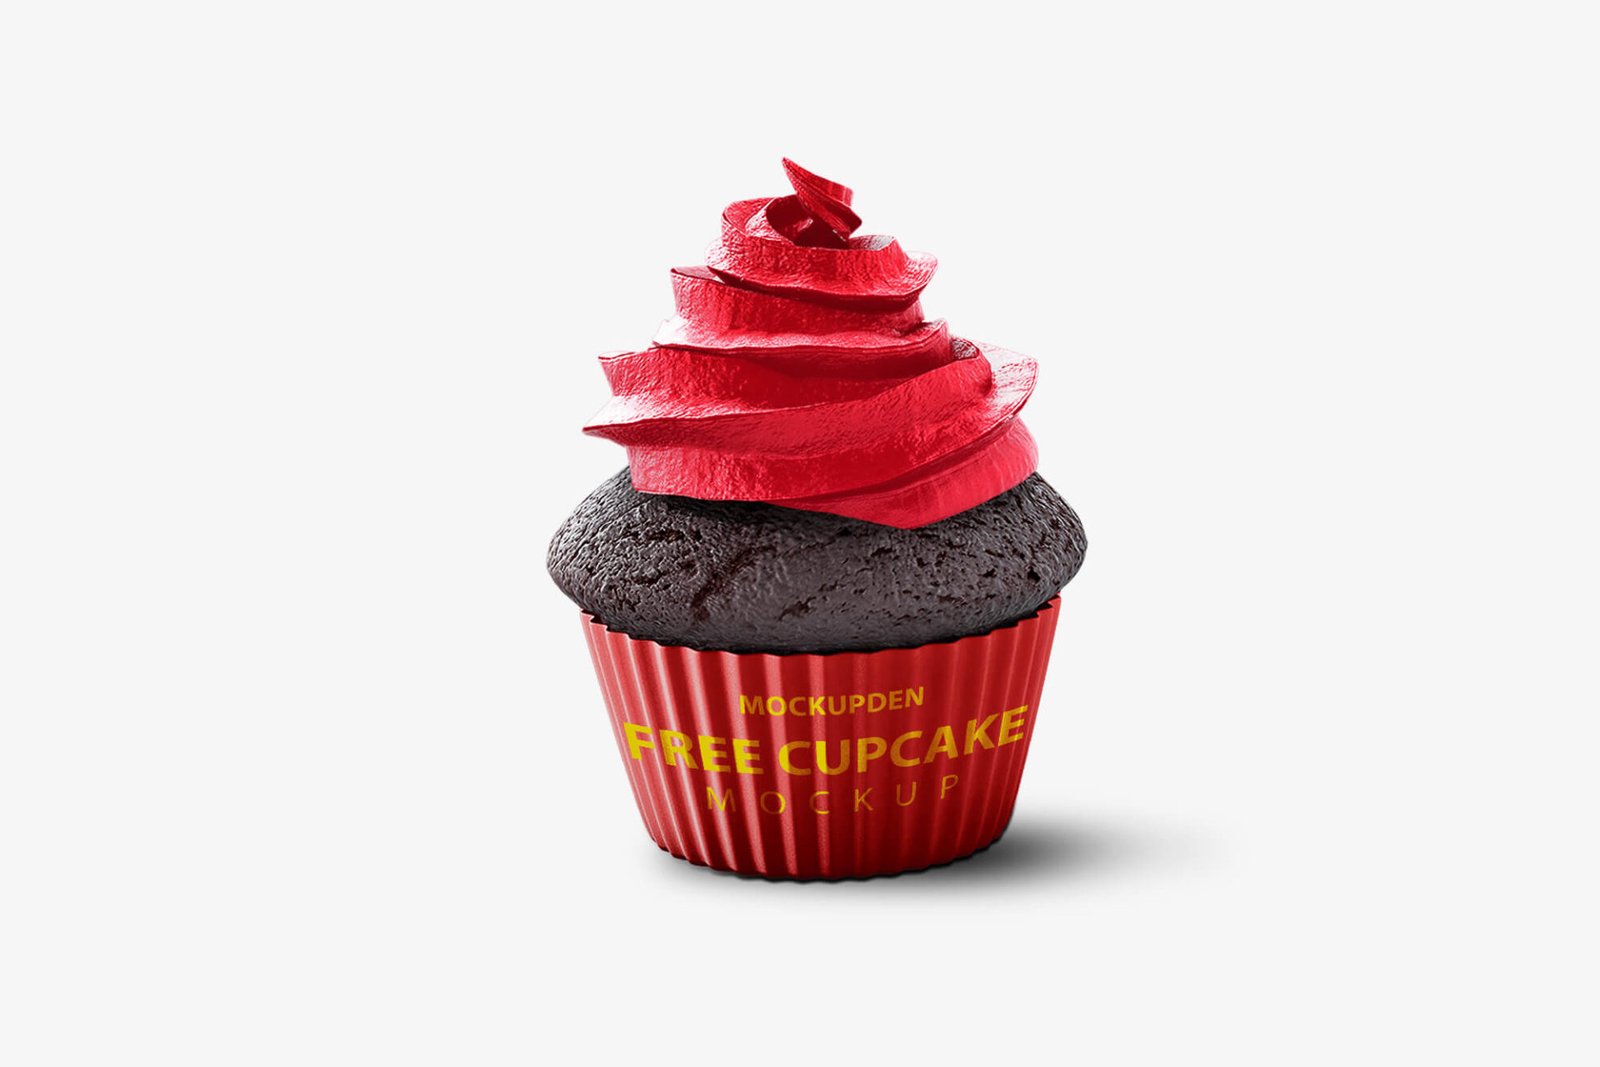 Download 21+ Free Creative Cupcake Mockup PSD Template with Topping